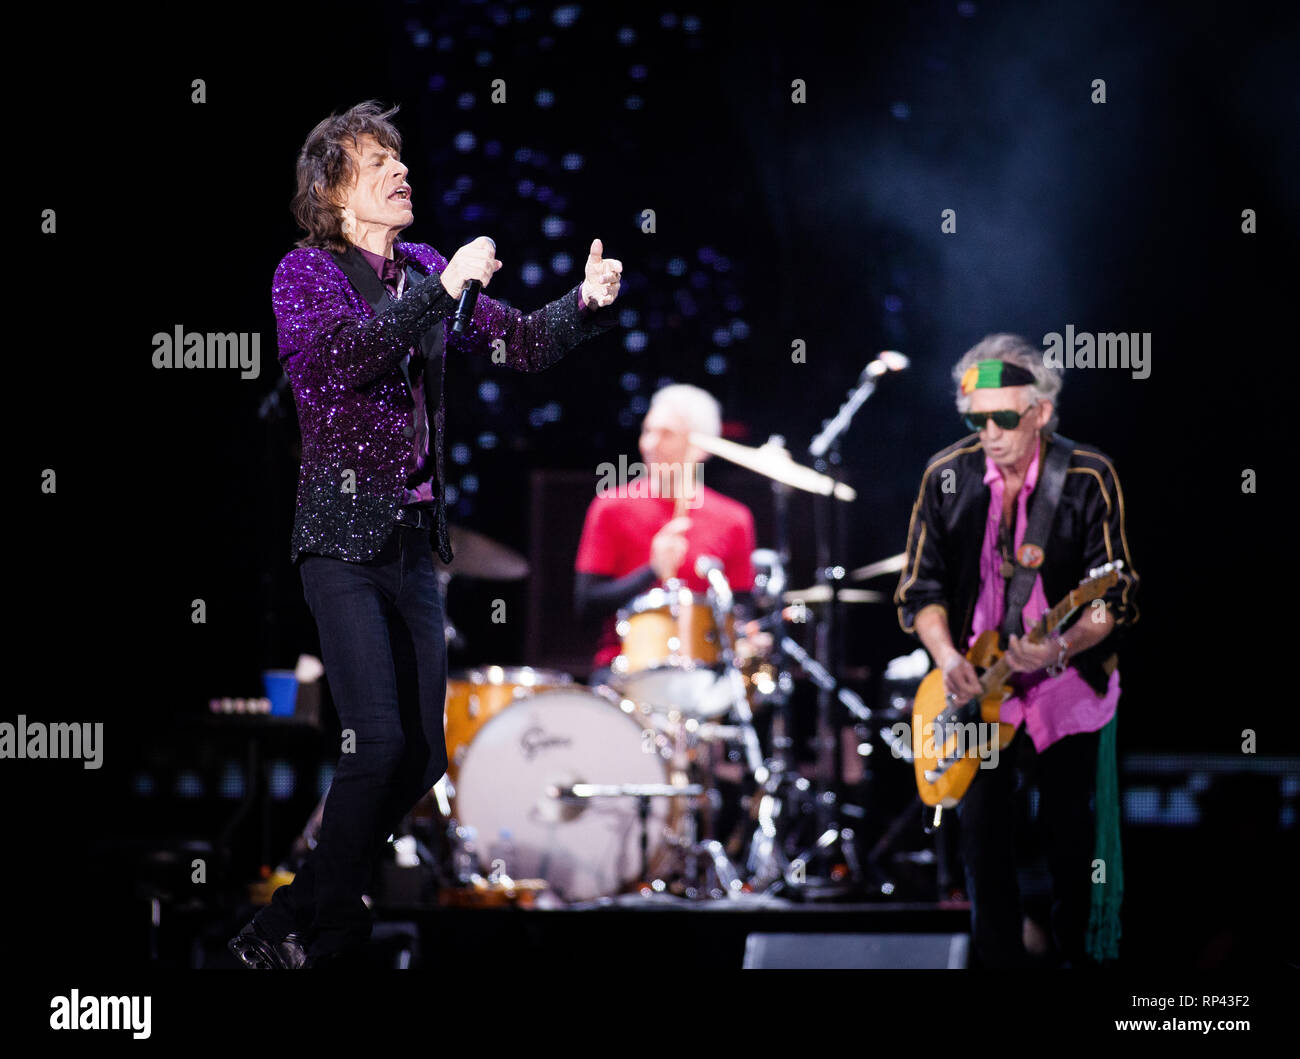 The Rolling Stones, the legendary English rock band performs a live concert  at Orange Stage at Roskilde Festival 2014. Here lead singer and songwriter  Mick Jagger is seen live on stage with